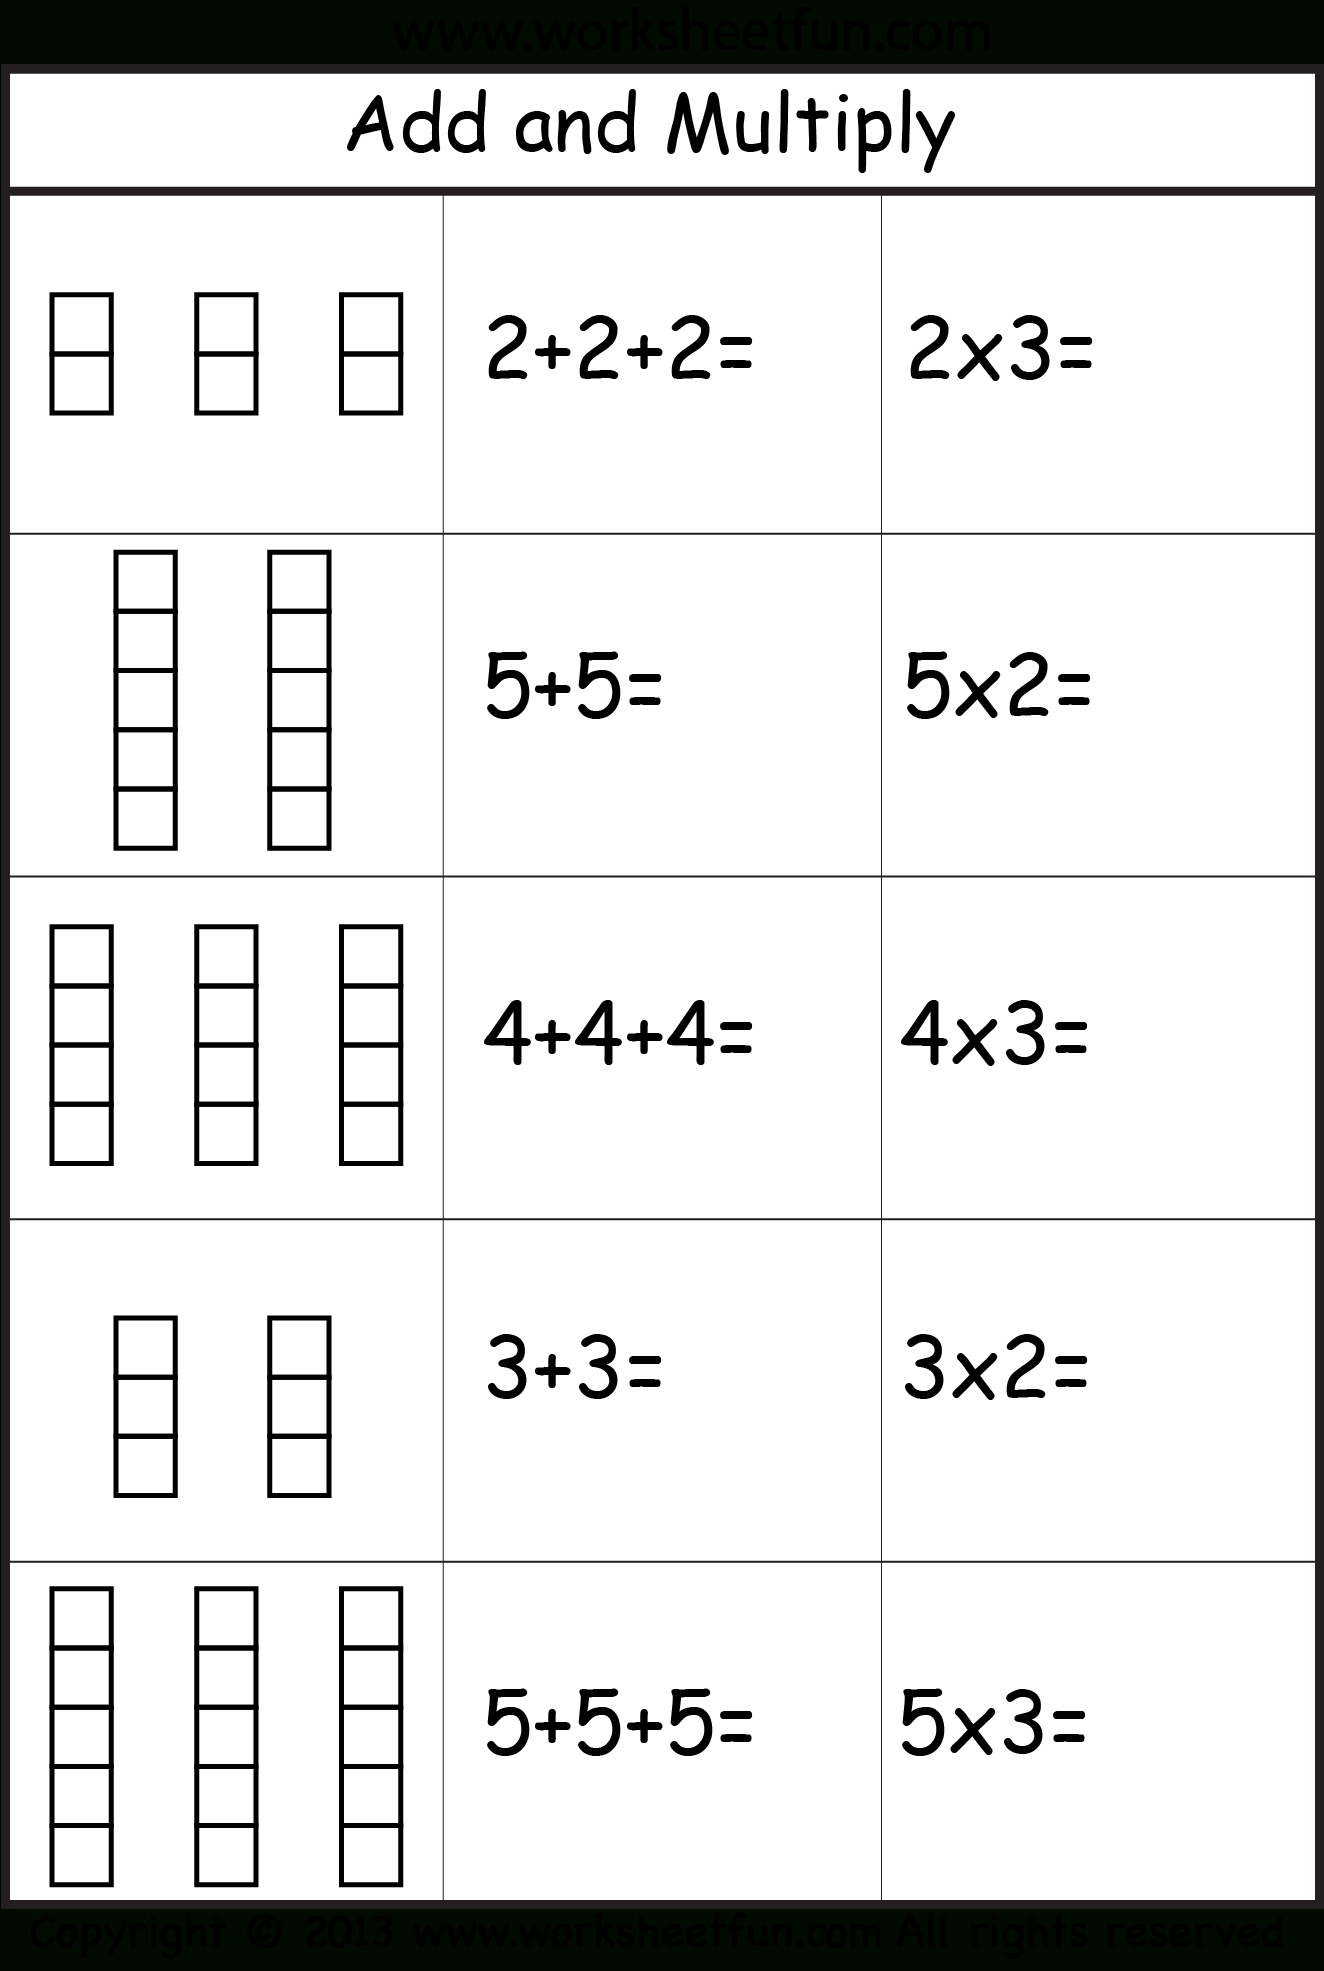 Relationship Between Addition And Multiplication Worksheets